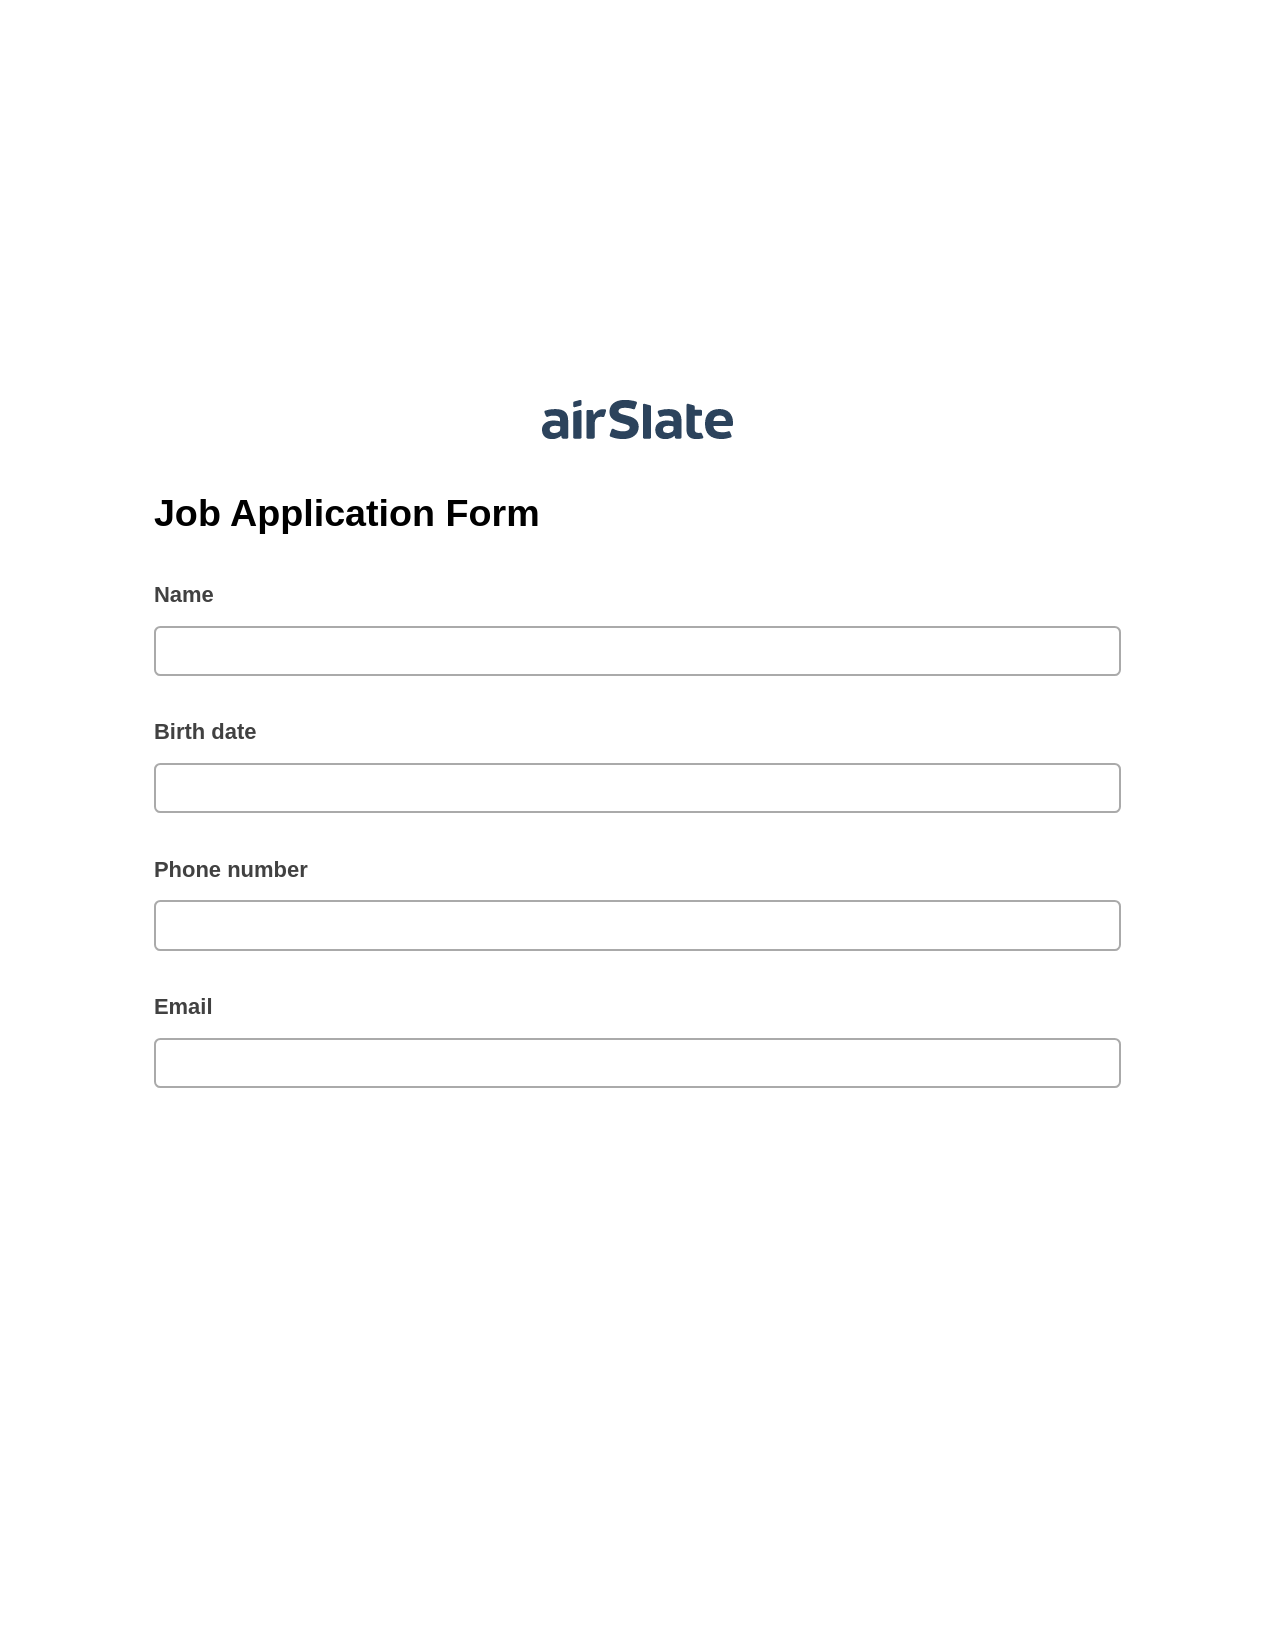 Job Application Form Pre-fill from CSV File Dropdown Options Bot, Update NetSuite Records Bot, Archive to SharePoint Folder Bot